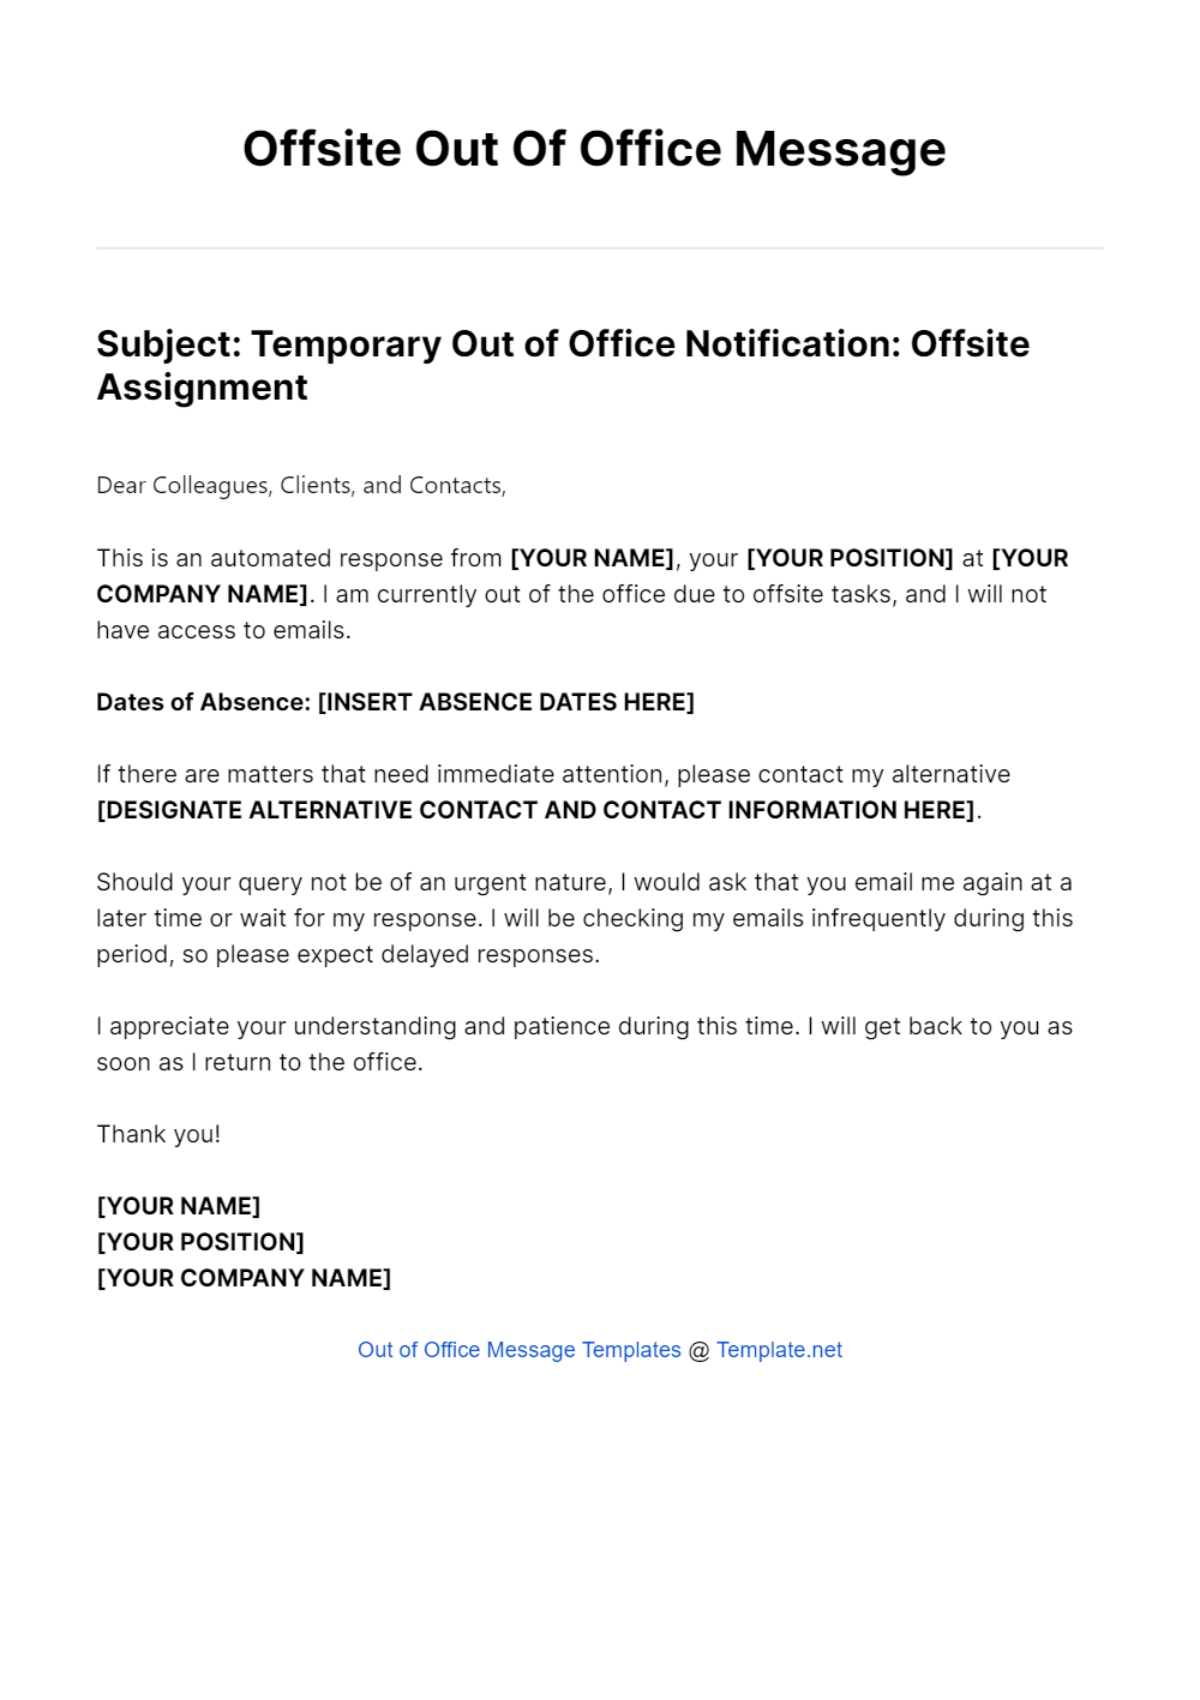 Offsite Out Of Office Message Template